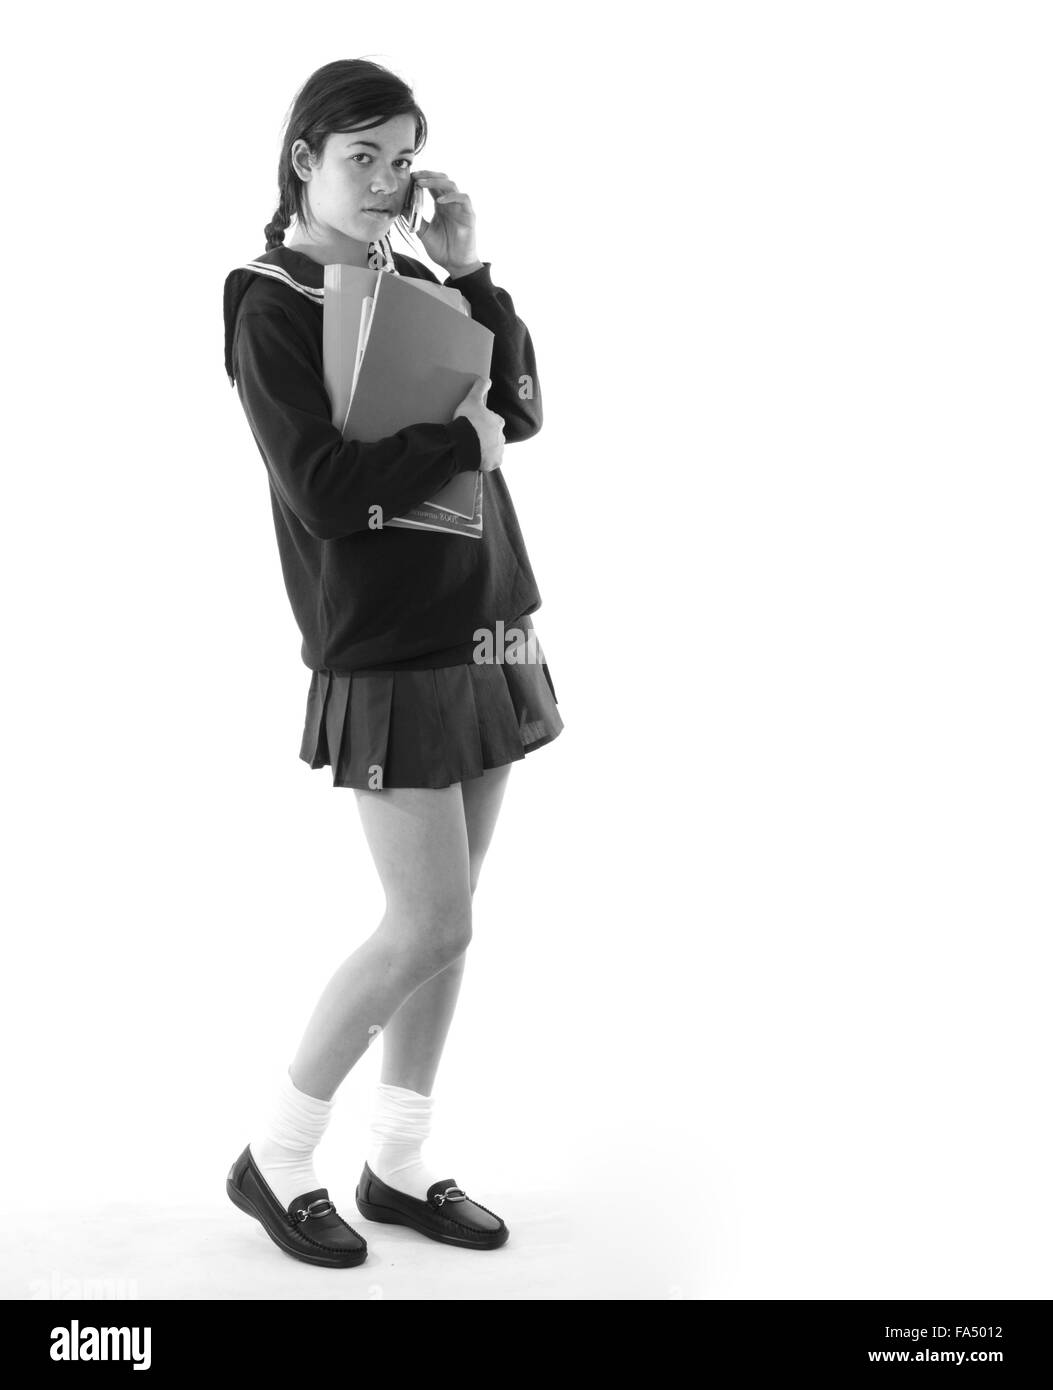 Schoolgirl on her cell phone carrying her school books, wearing a very short miniskirt Stock Photo